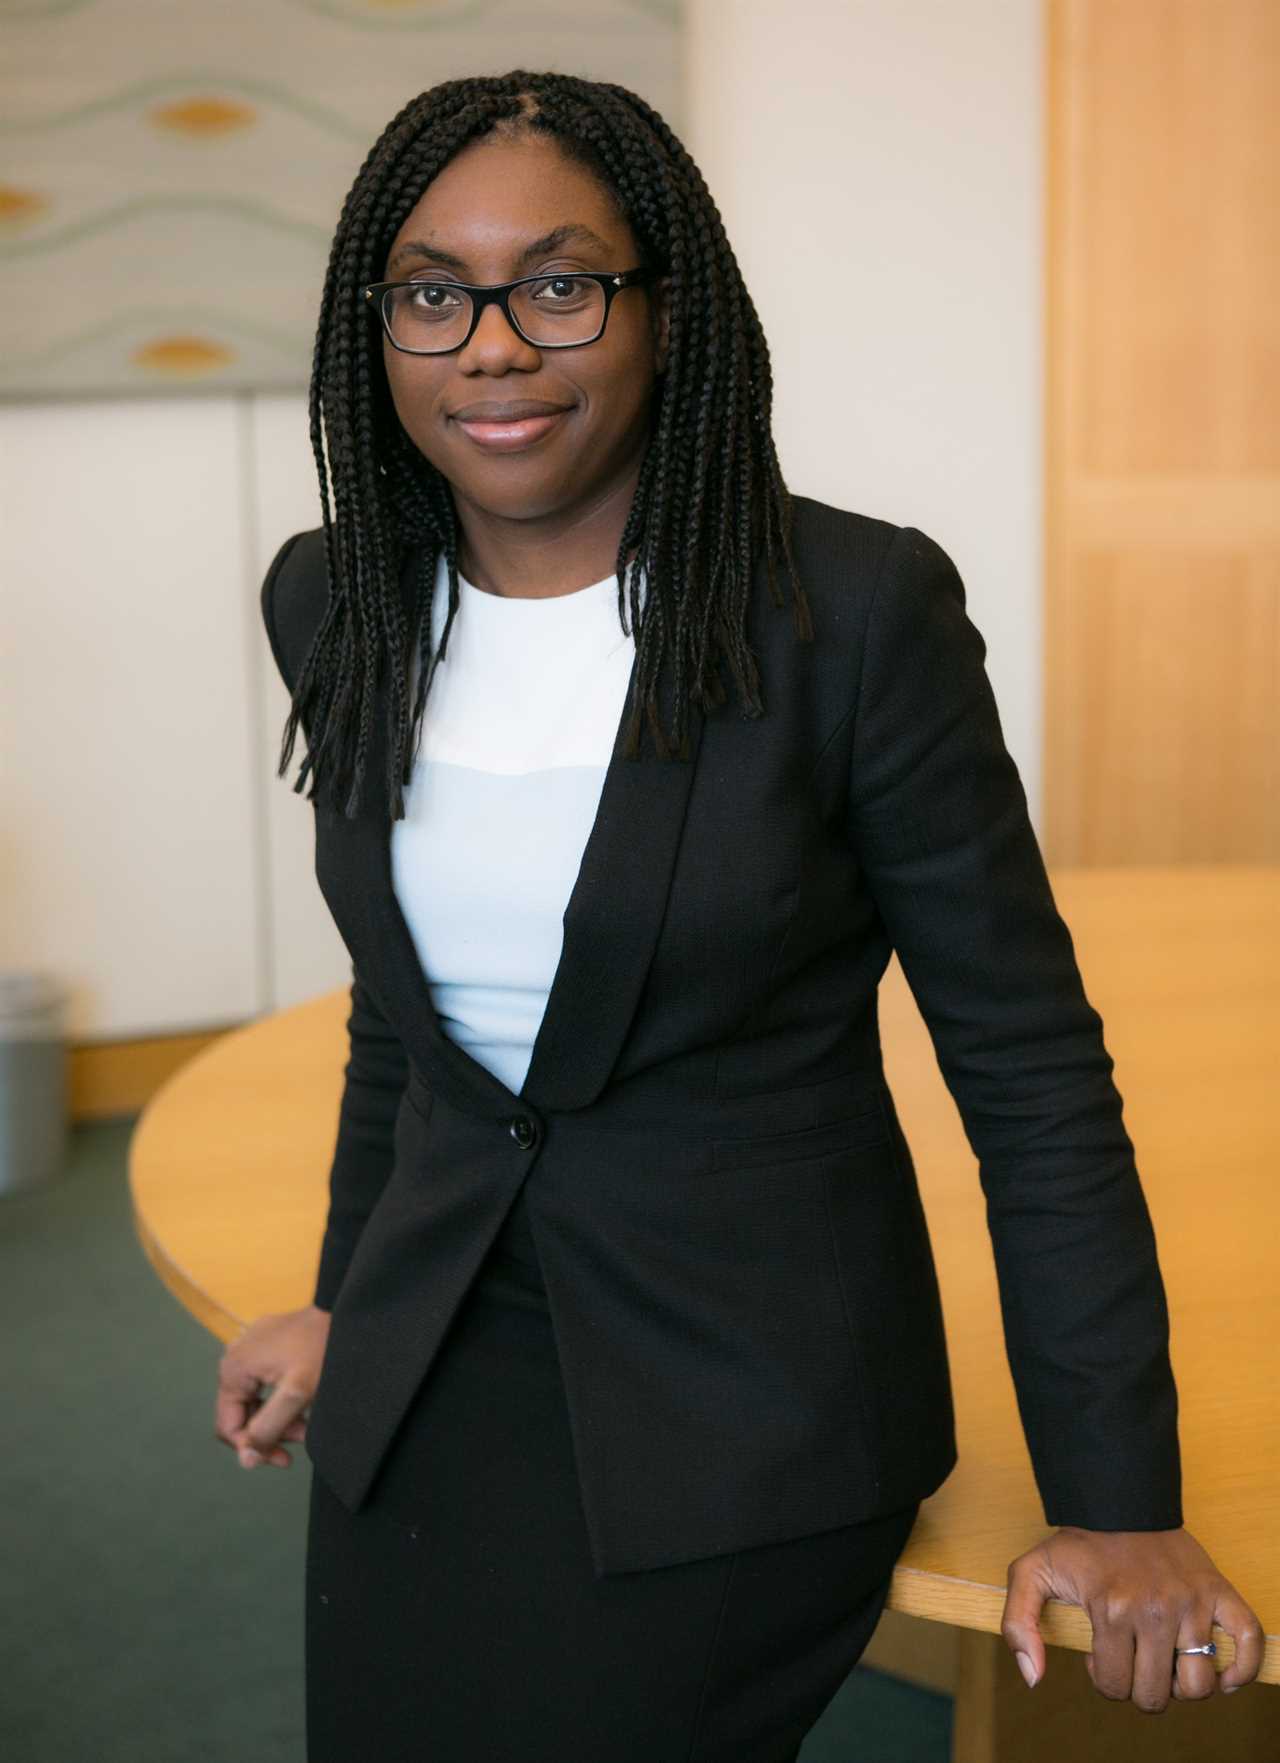 Kemi Badenoch unveils radical plan to slash sky-high cost of childcare for millions of Sun readers